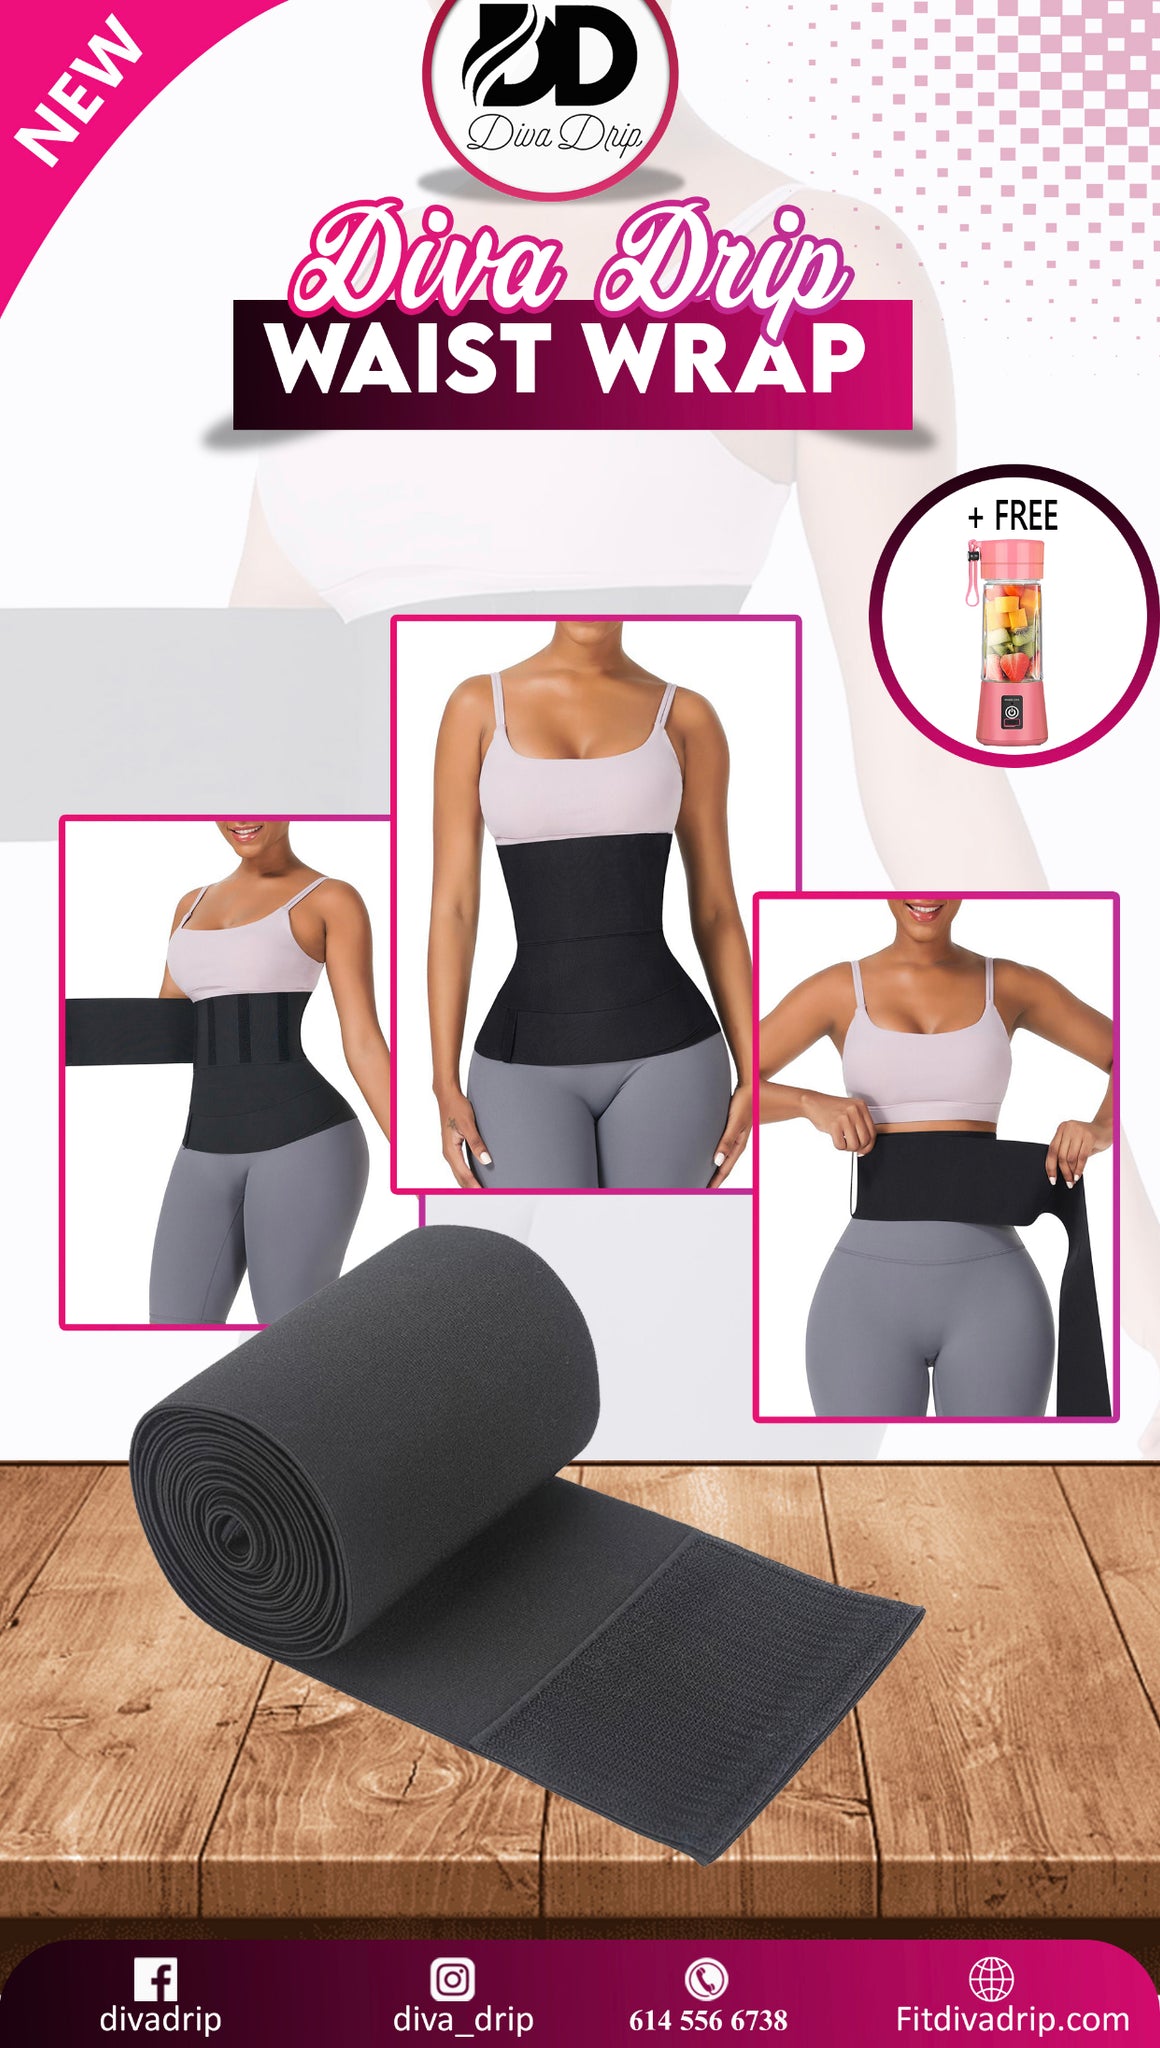 DIVA_ DRIP Waist wrap with FREE PORTABLE BLENDER!! – fitdivadrip